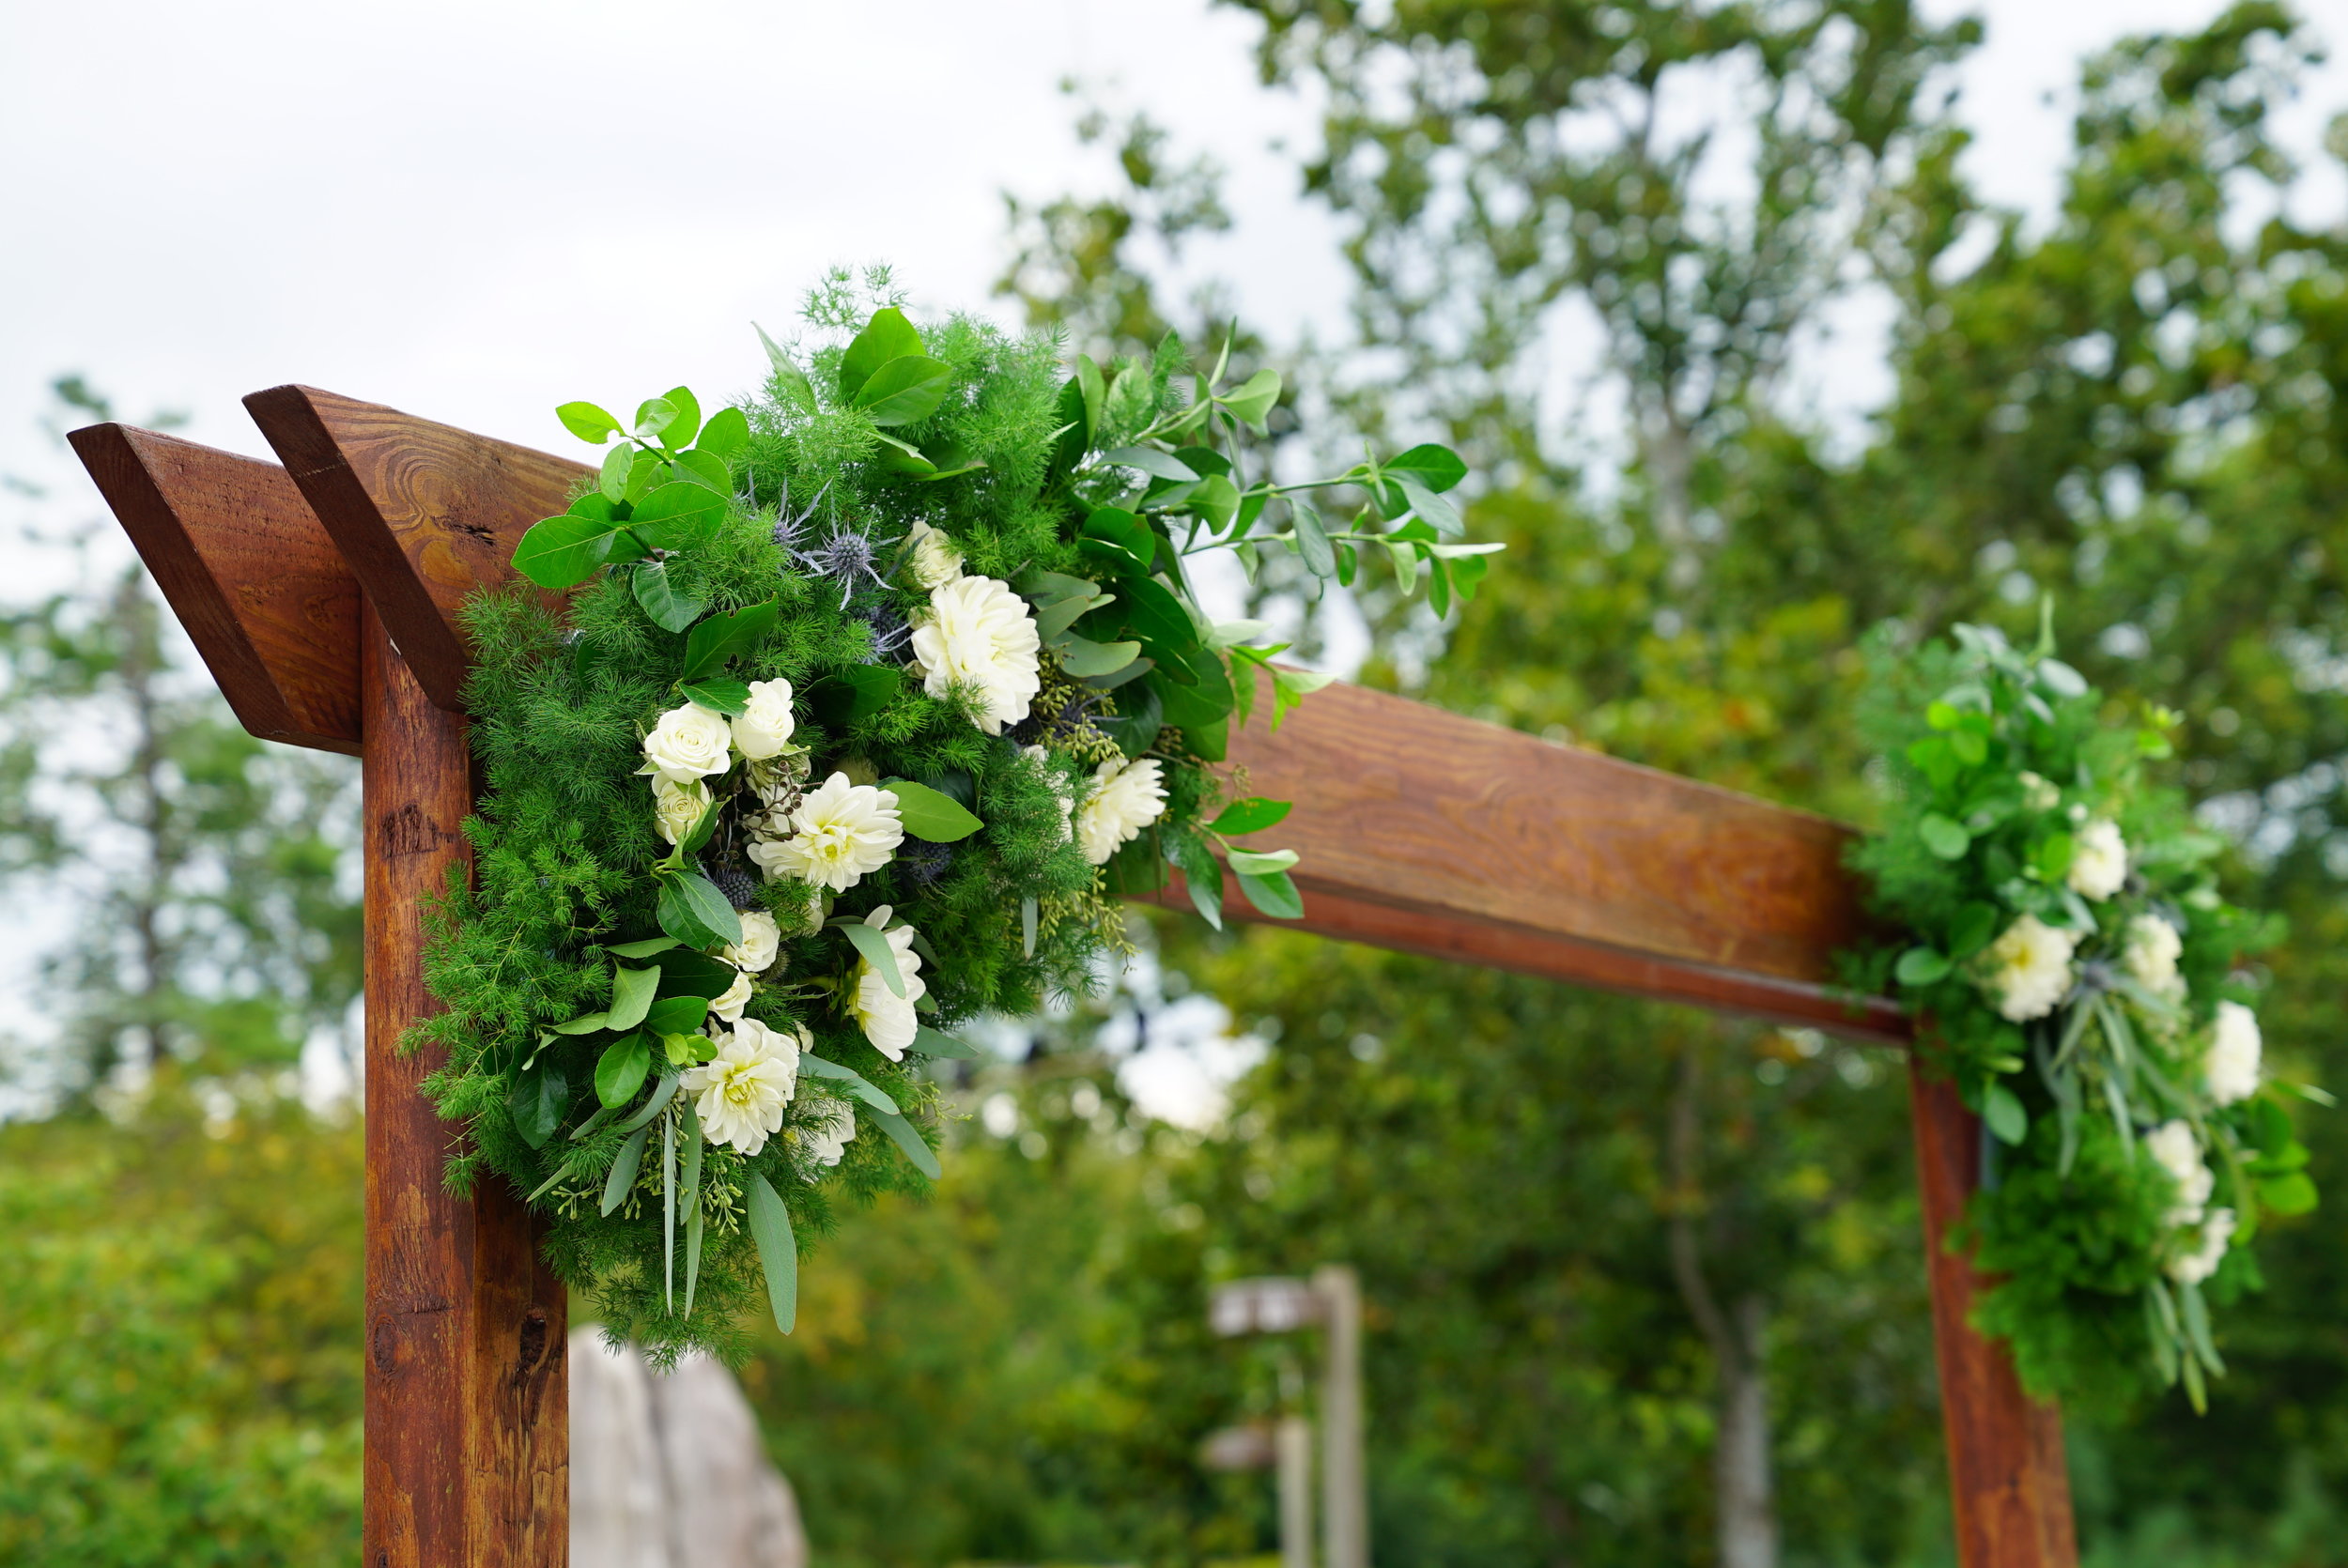  The arch was built using landscaping beams, then stained to match the wood on location. We sunk the uprights into concrete (poured into decorative pots) since the ceremony was on a wooden deck and we had no other way of anchoring the arch into the g